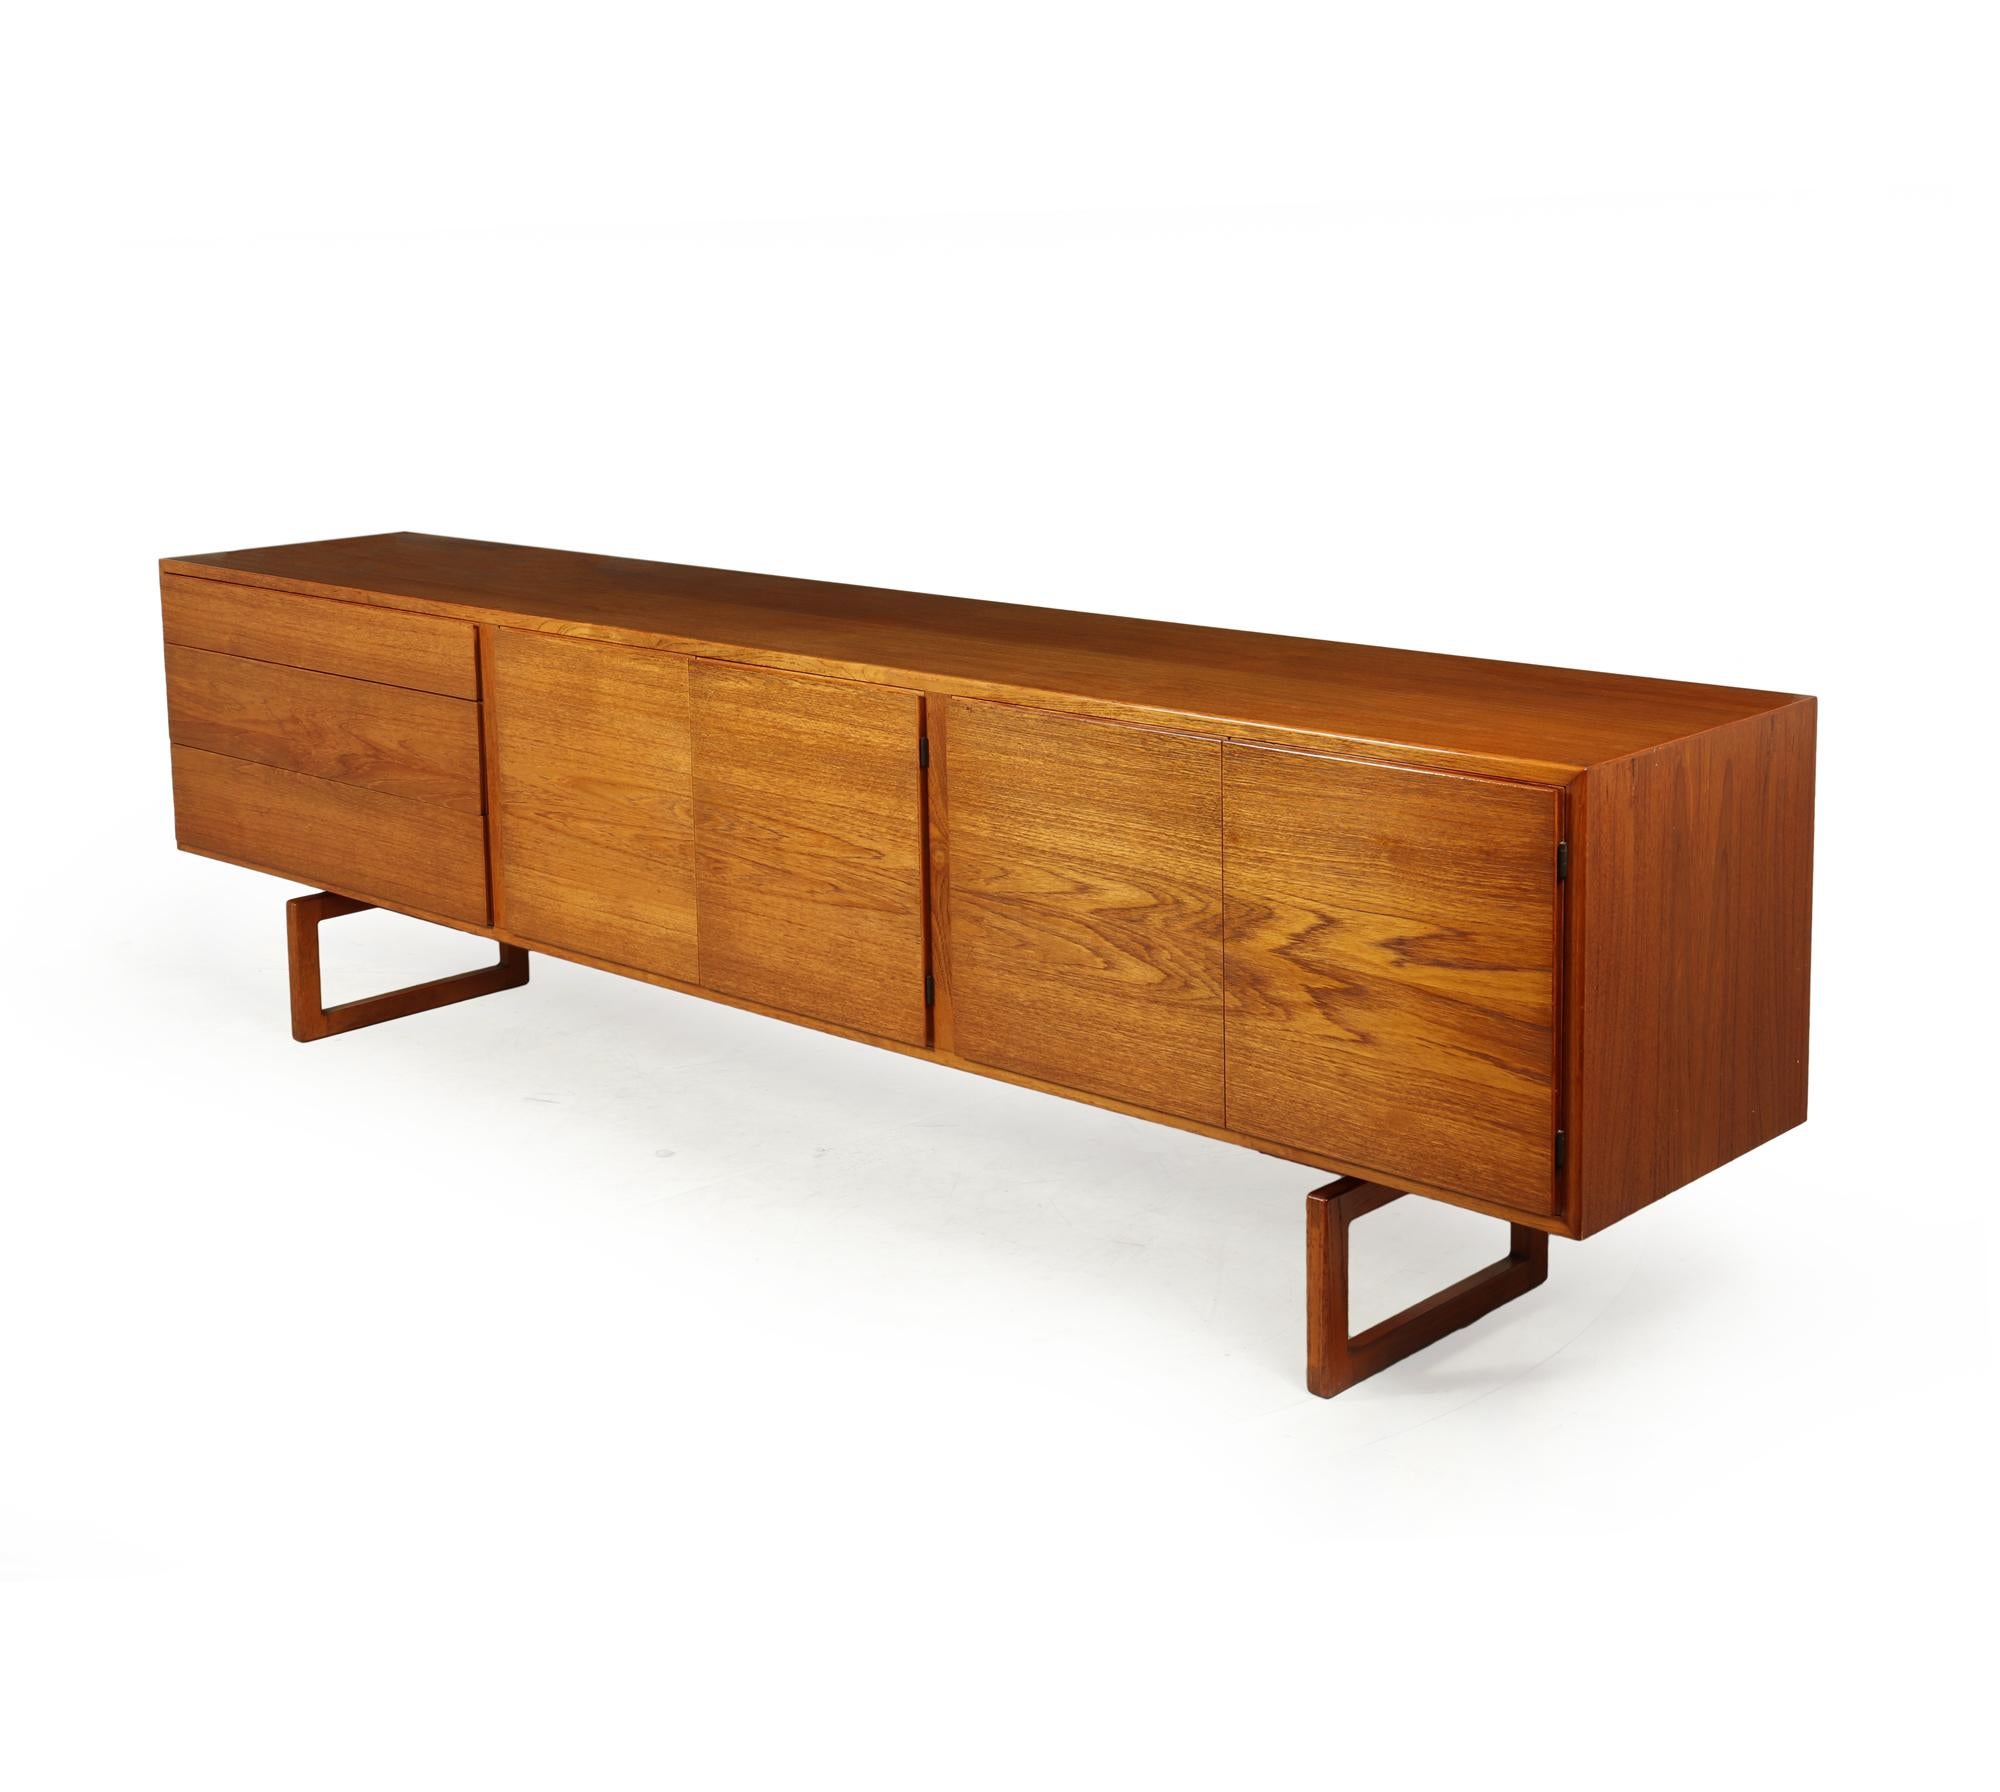 This sideboard was designed by Arne Hovman Olsen and prouced by Mogens Kold in the mid 1960’s in Denmark, the sidebord has four doors with adjustable shelves behind, to the left are three graduating drawers all these have finger grip edging making